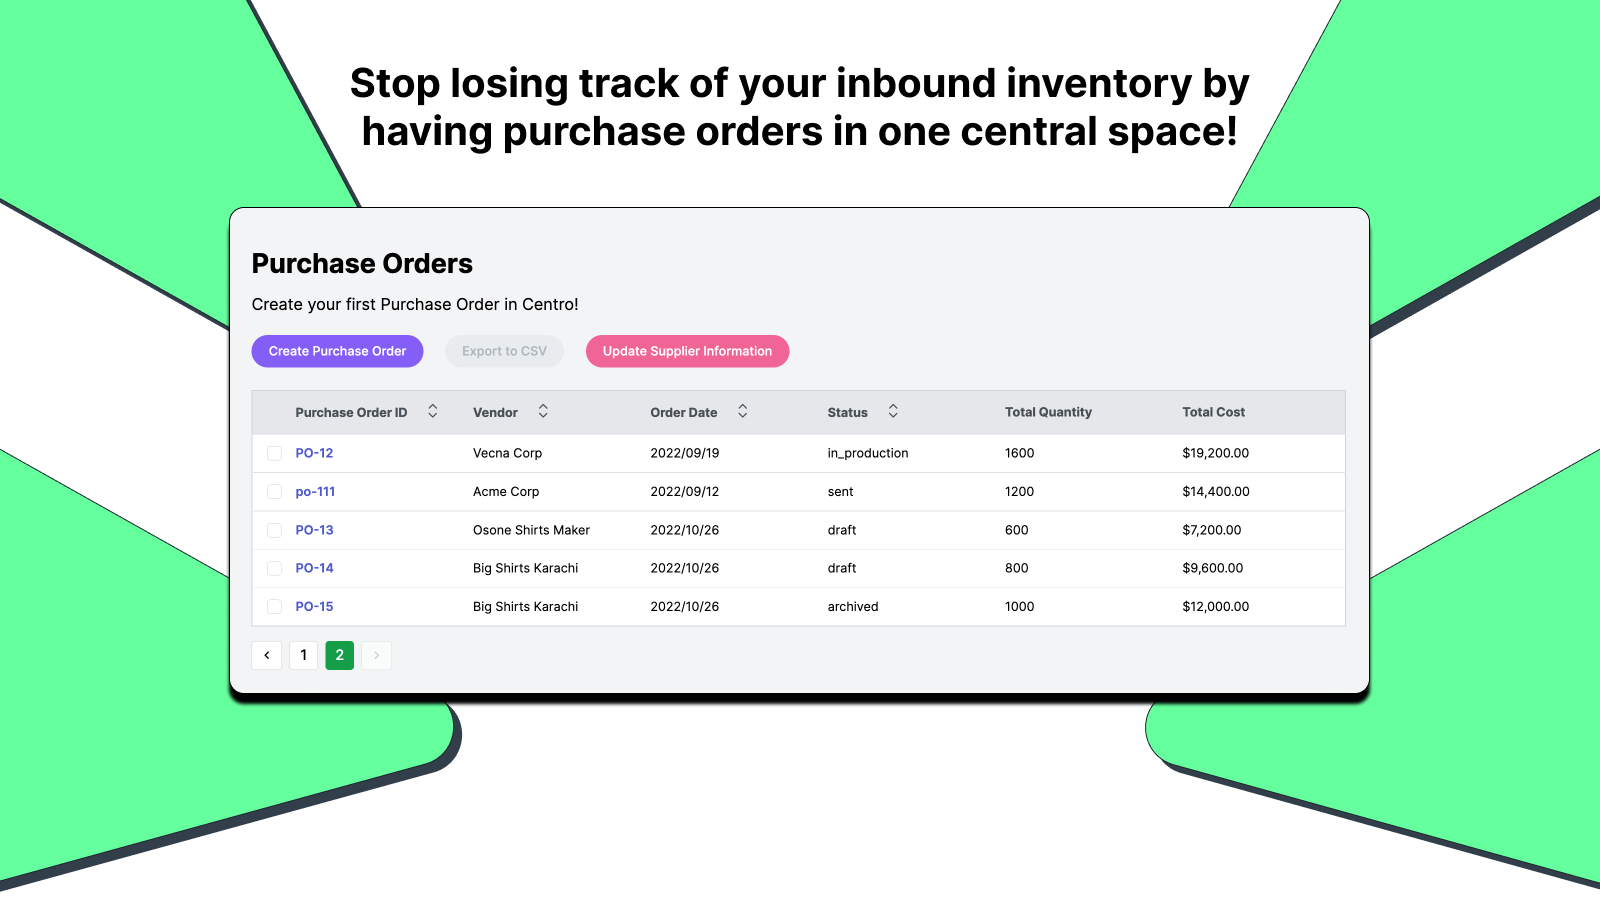 Manage your purchasing in one central place